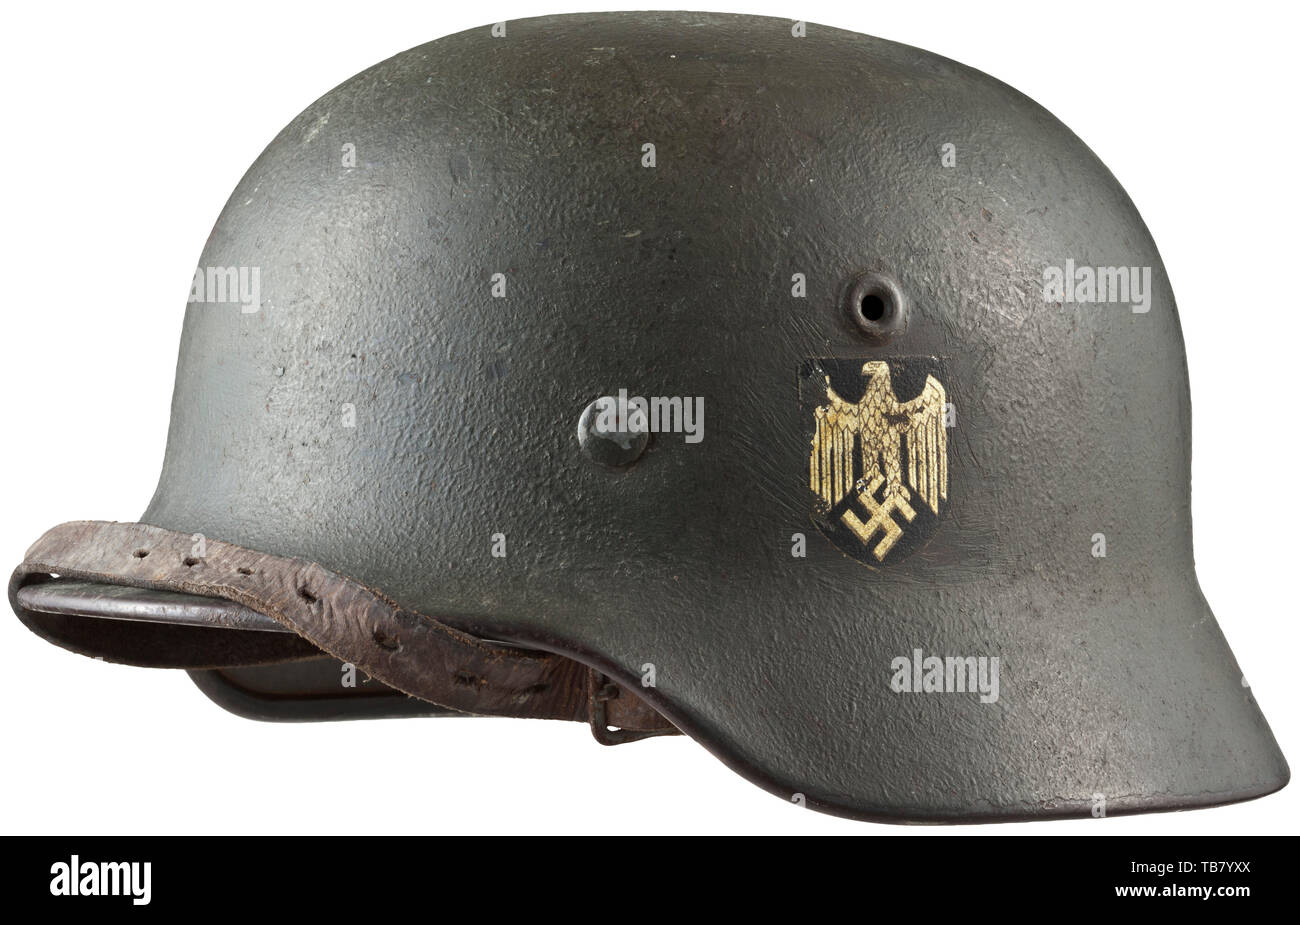 Body armour, helmets, German steel helmet M40, issued 1940, Army pattern, Editorial-Use-Only Stock Photo